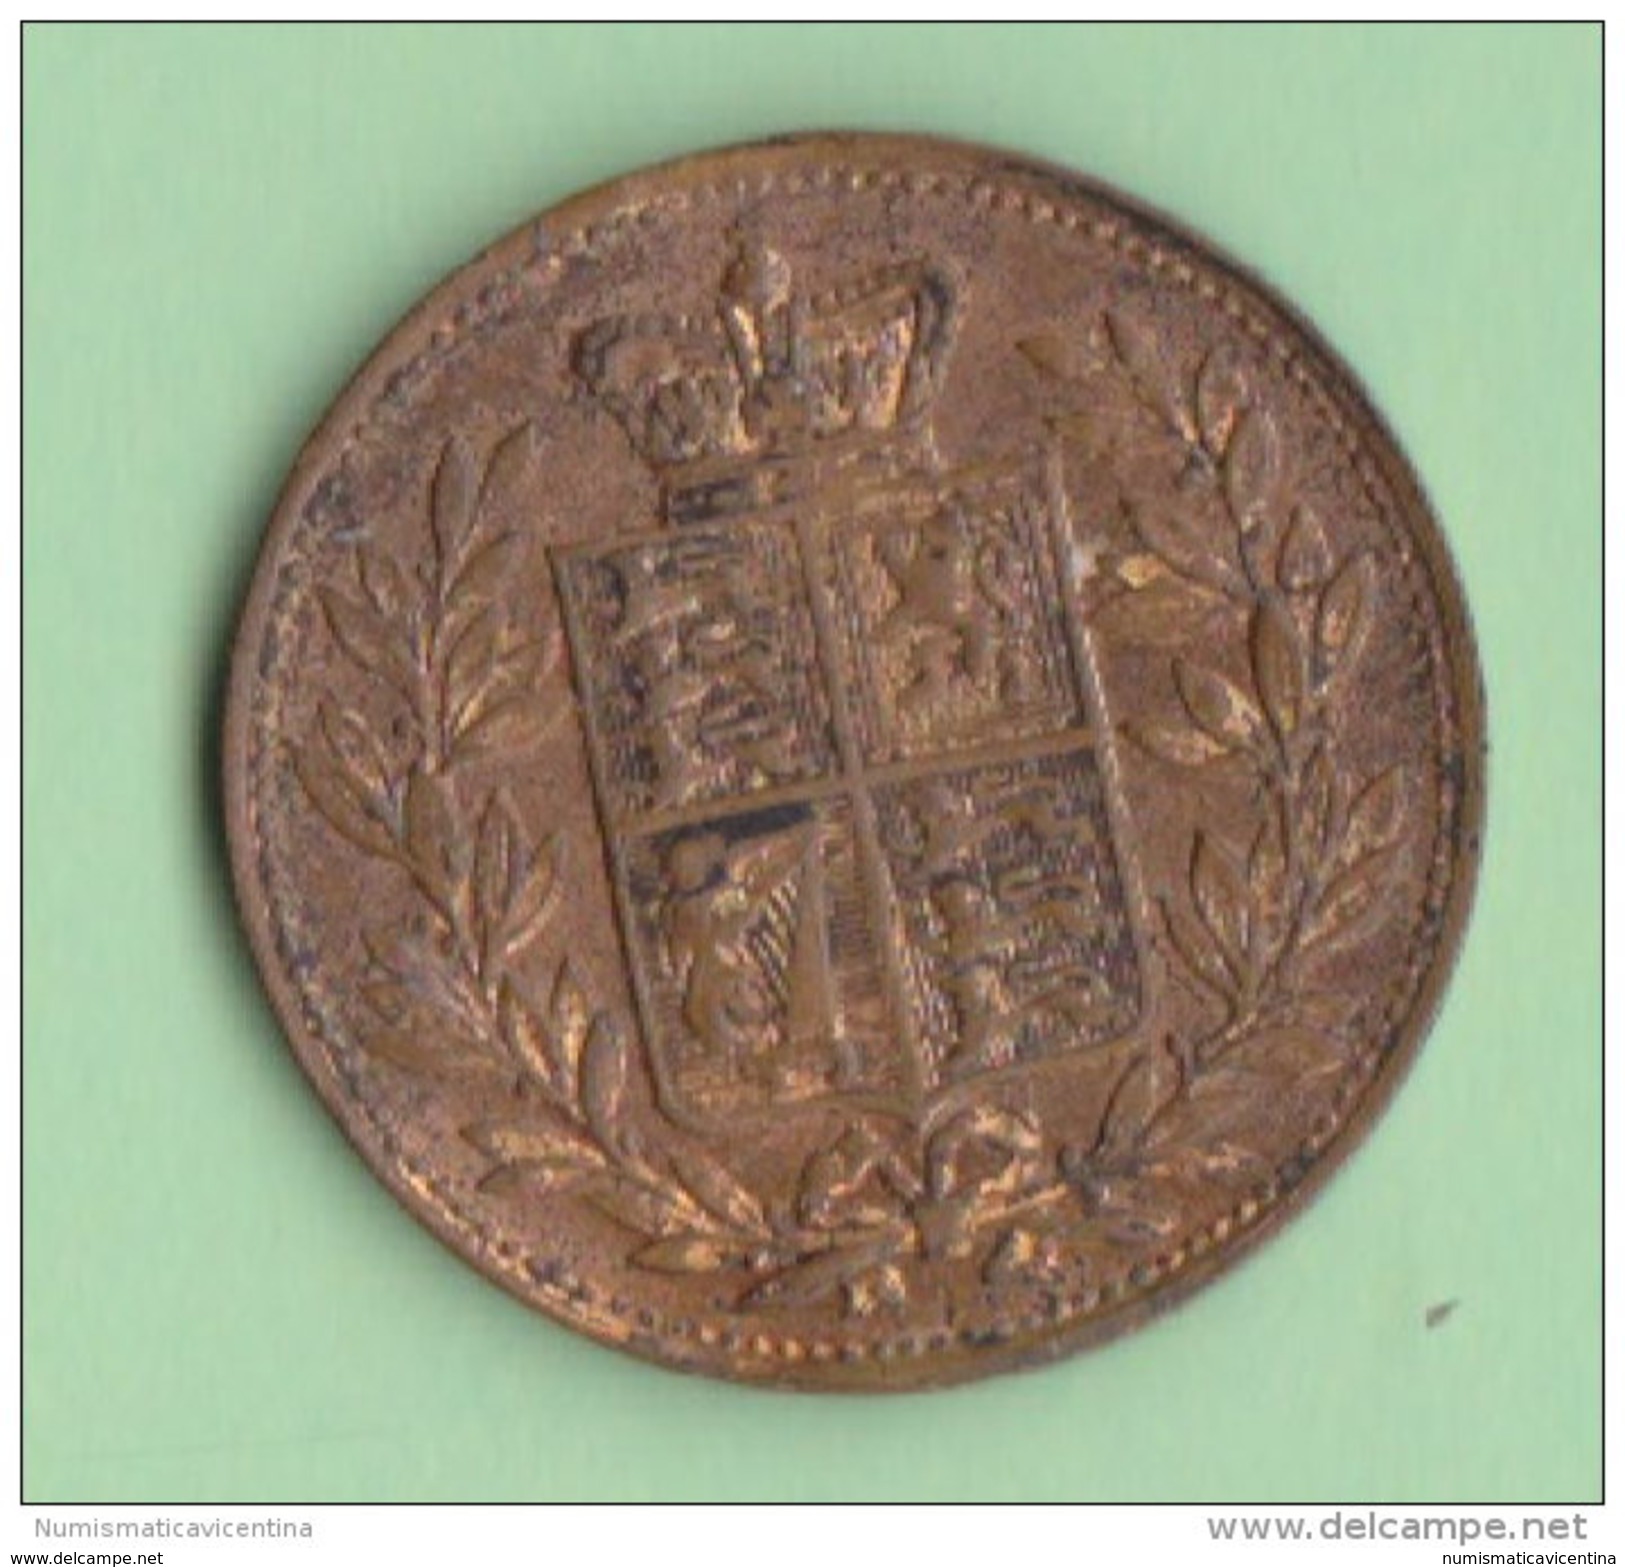 Victoria Queen Medal - Royal/Of Nobility